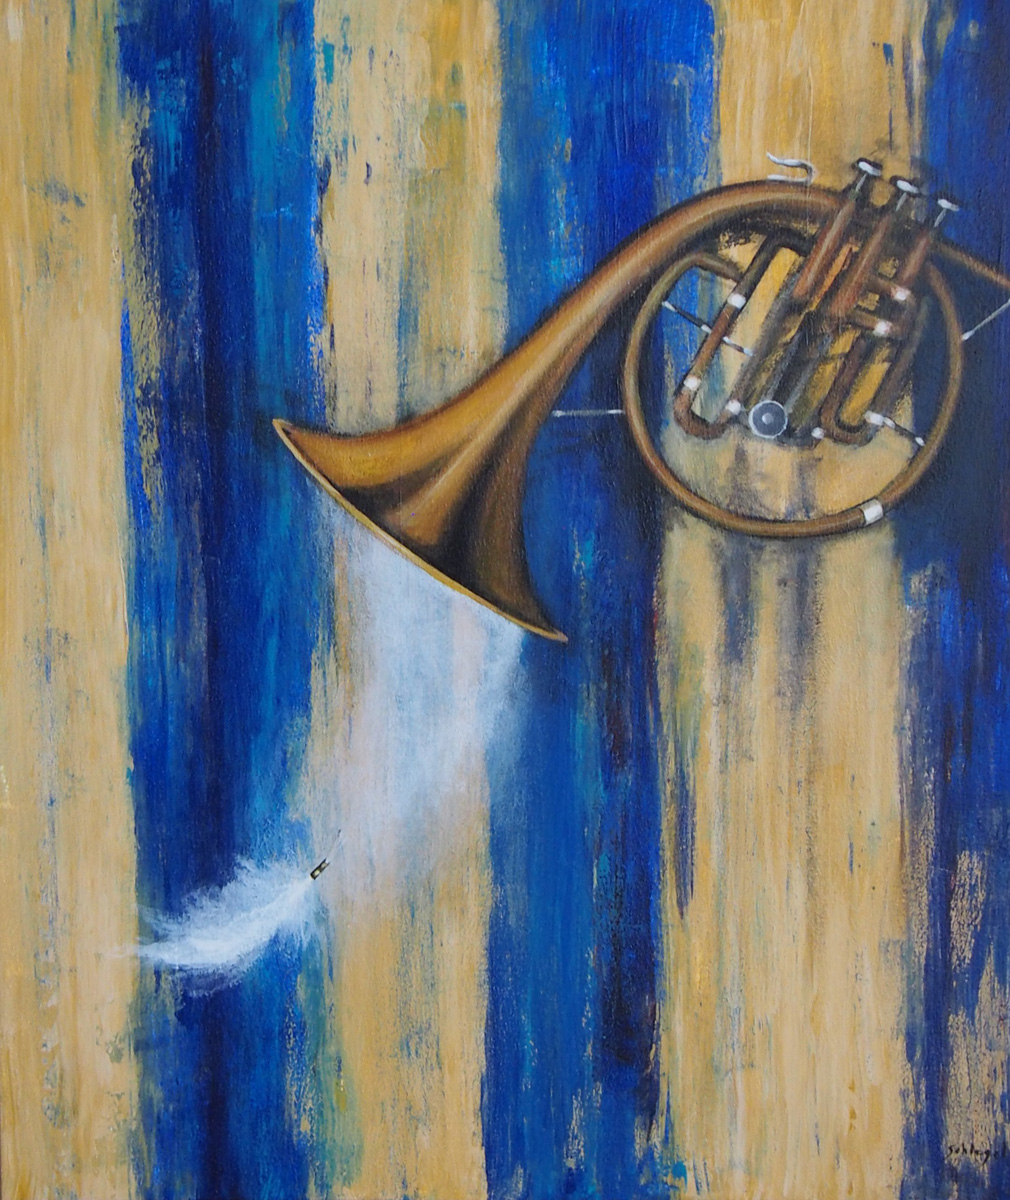 French Horn from The Symphonic Series  Image